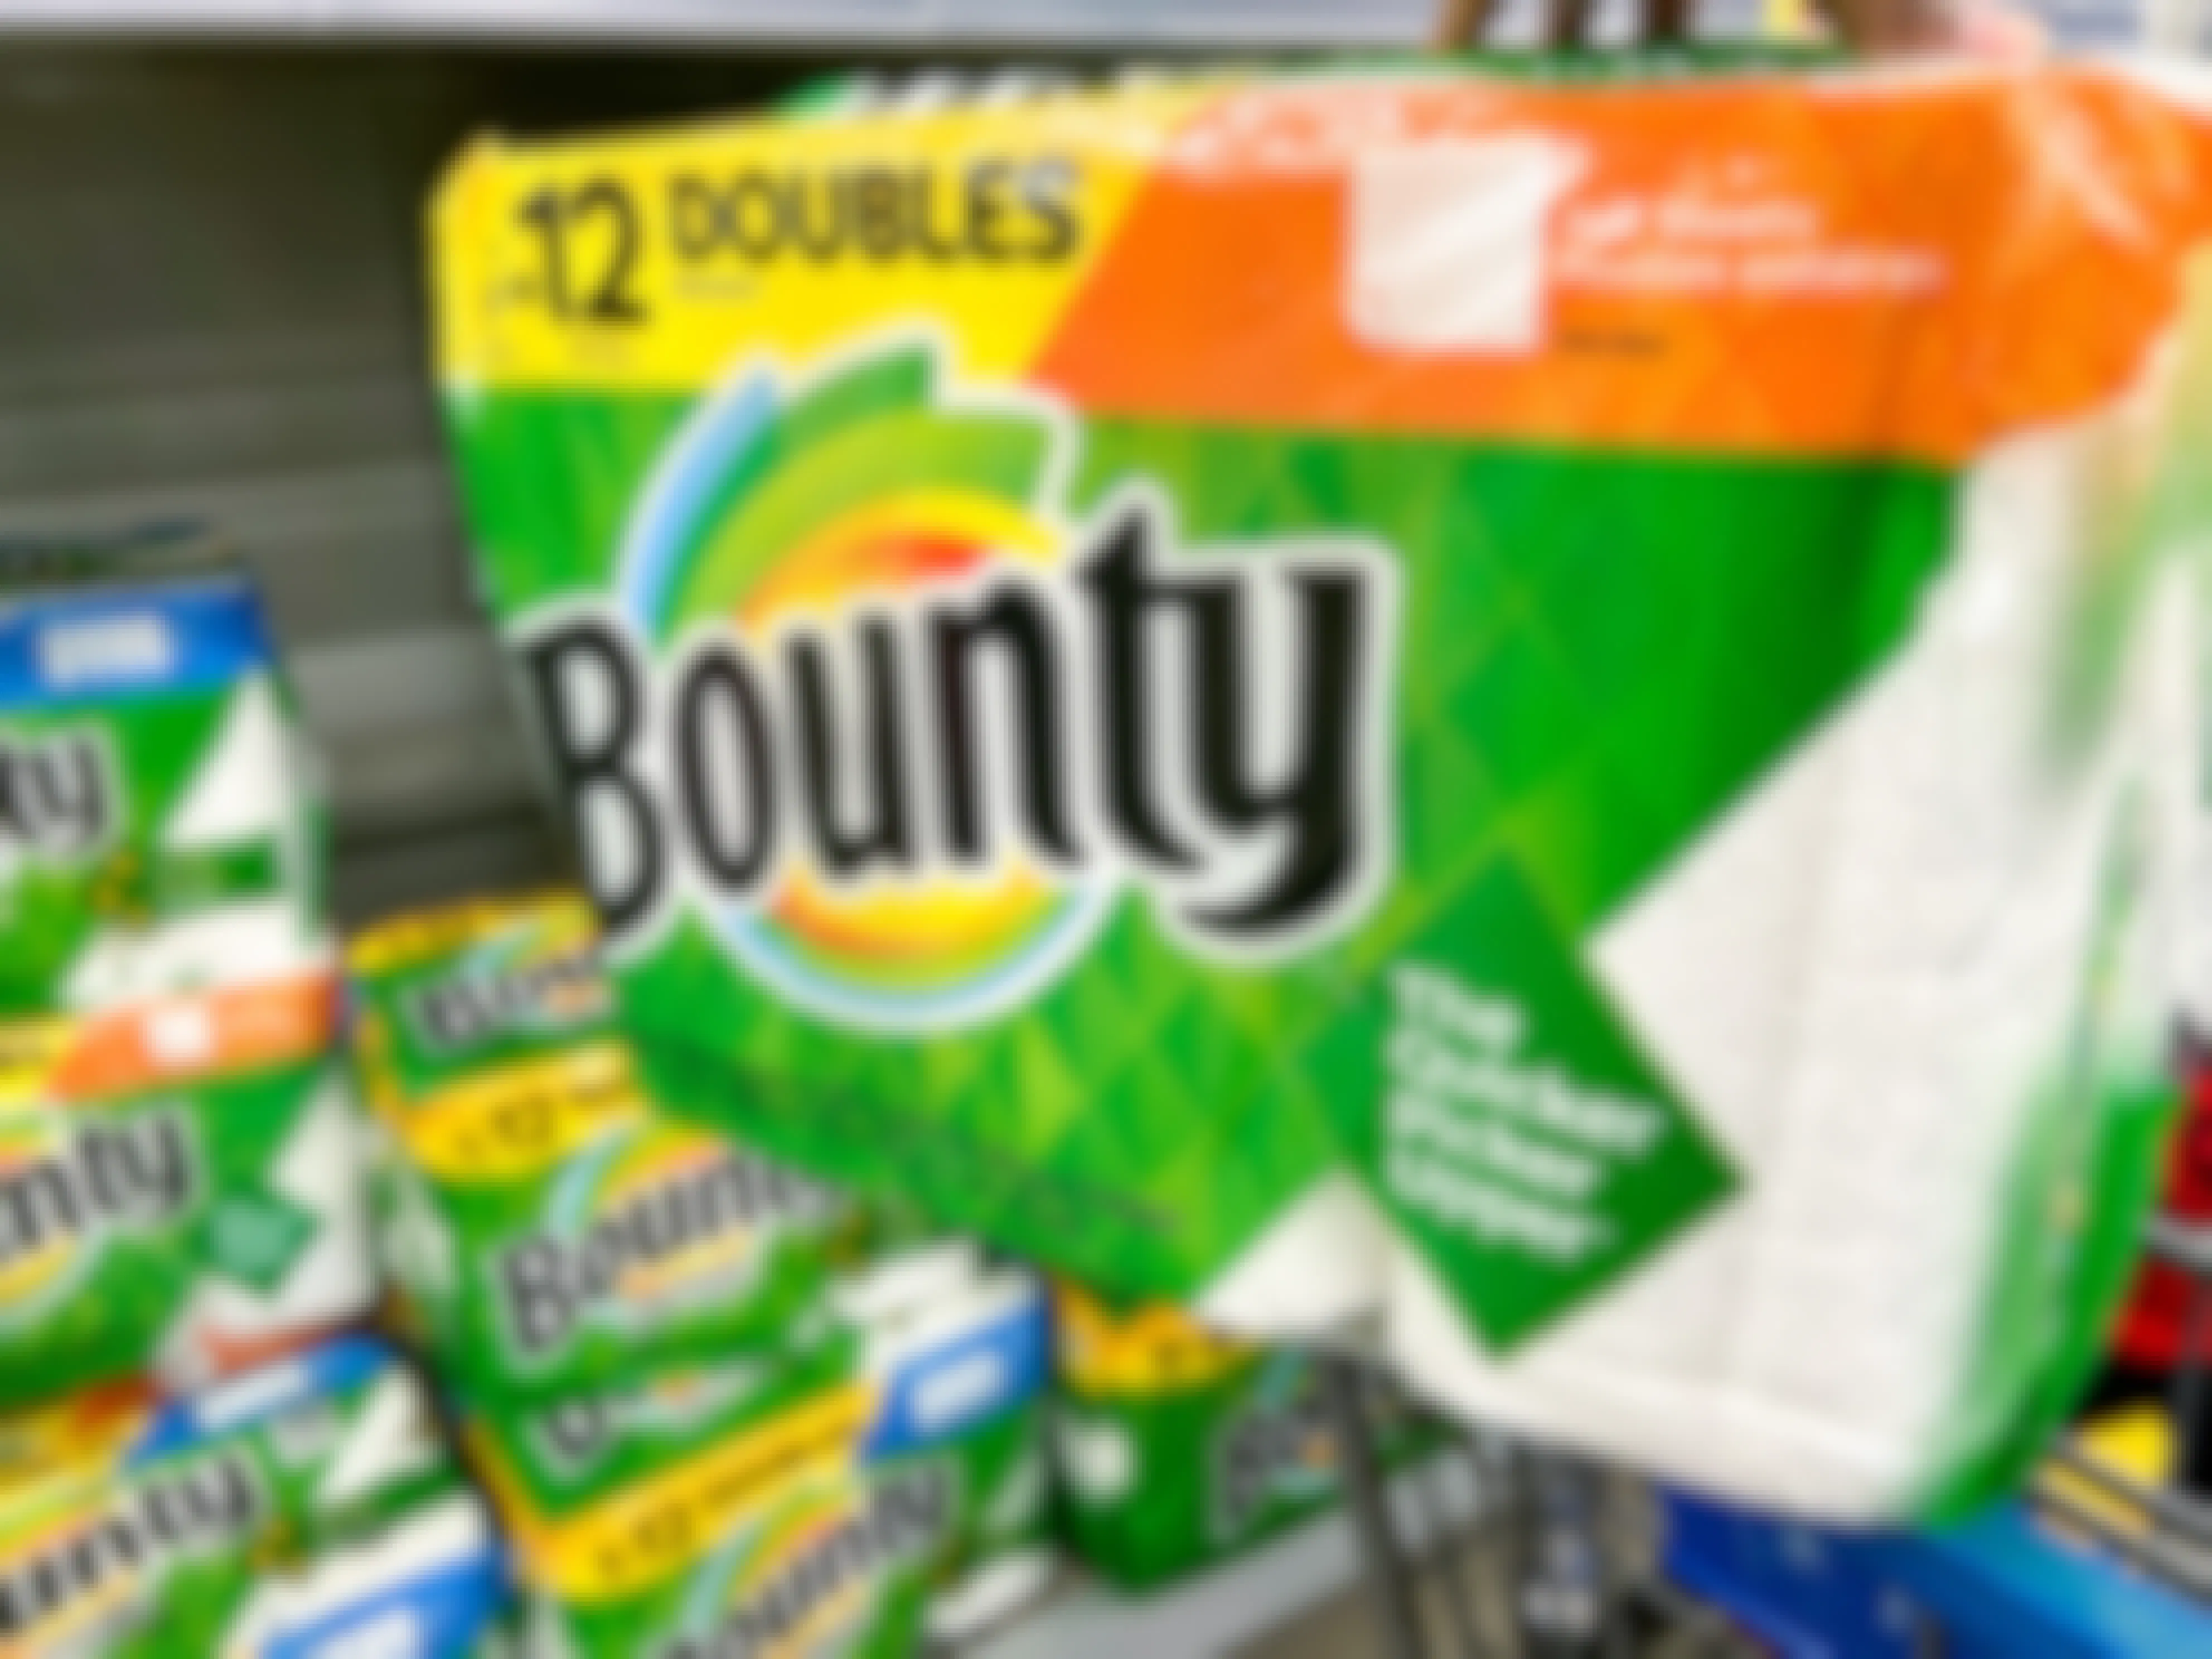 bounty paper towels at Walmart on a cart